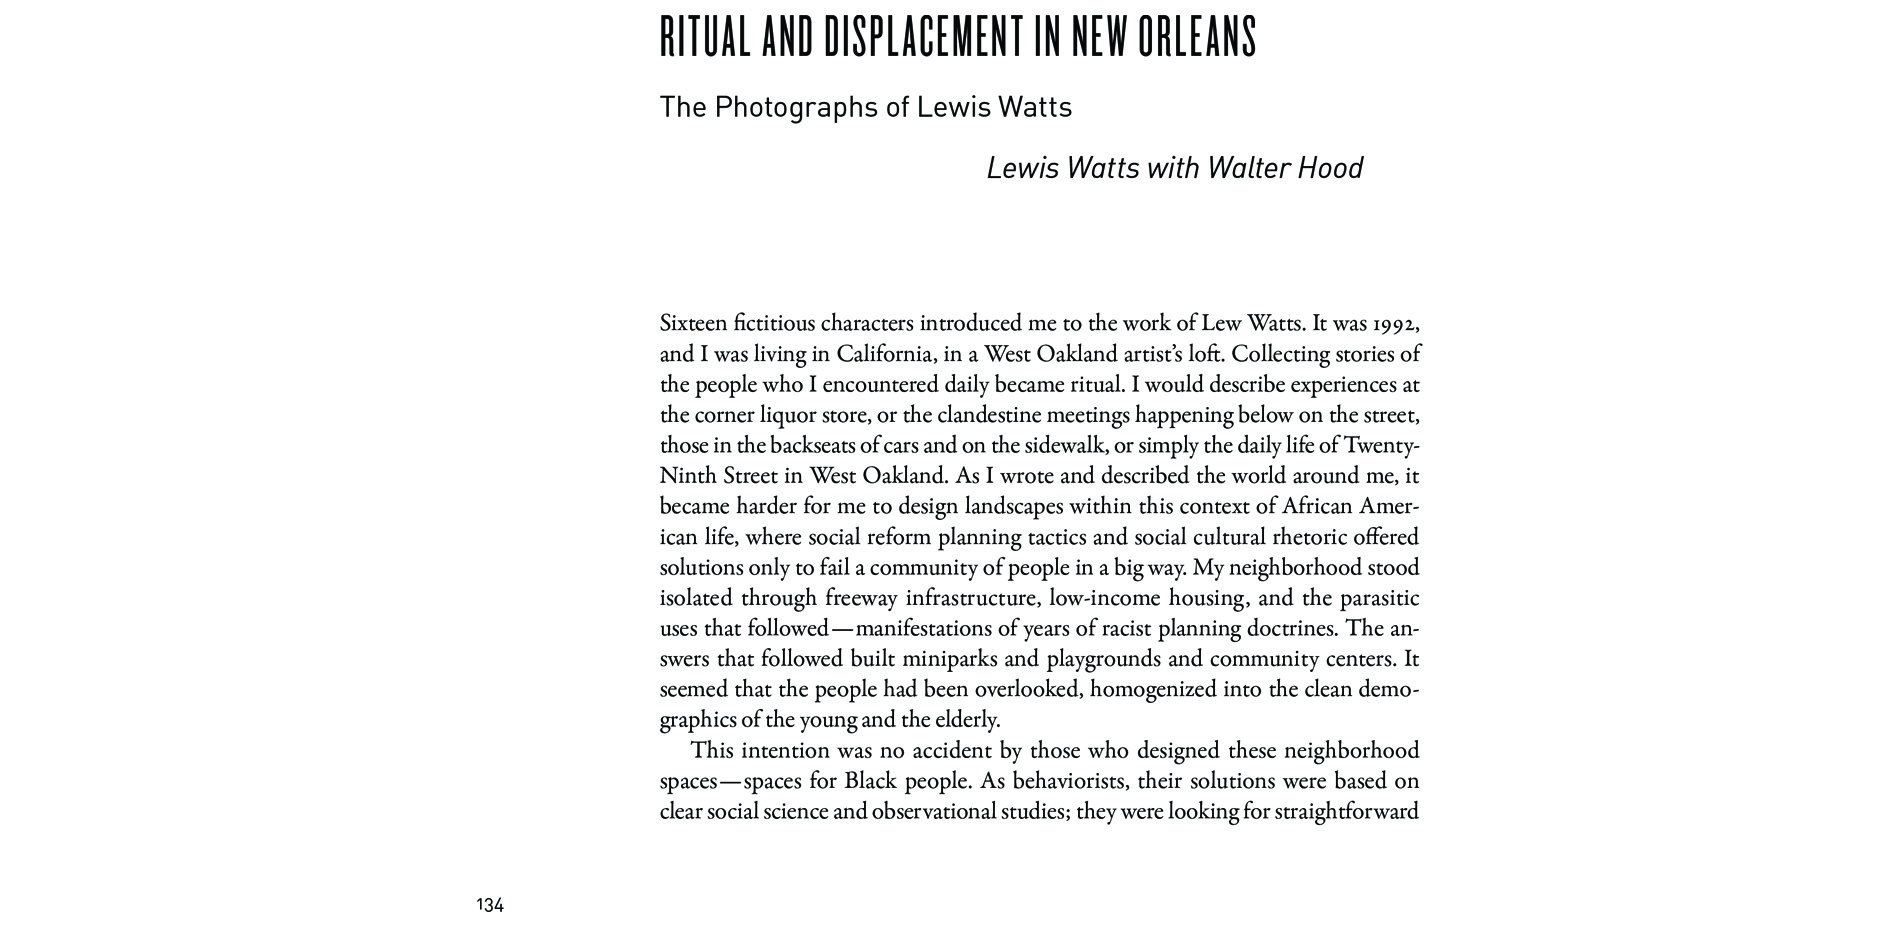 Black Landscapes Matter, Ritual and Displacement in New Orleans: The Photographs of Lewis Watts (pg. 134)